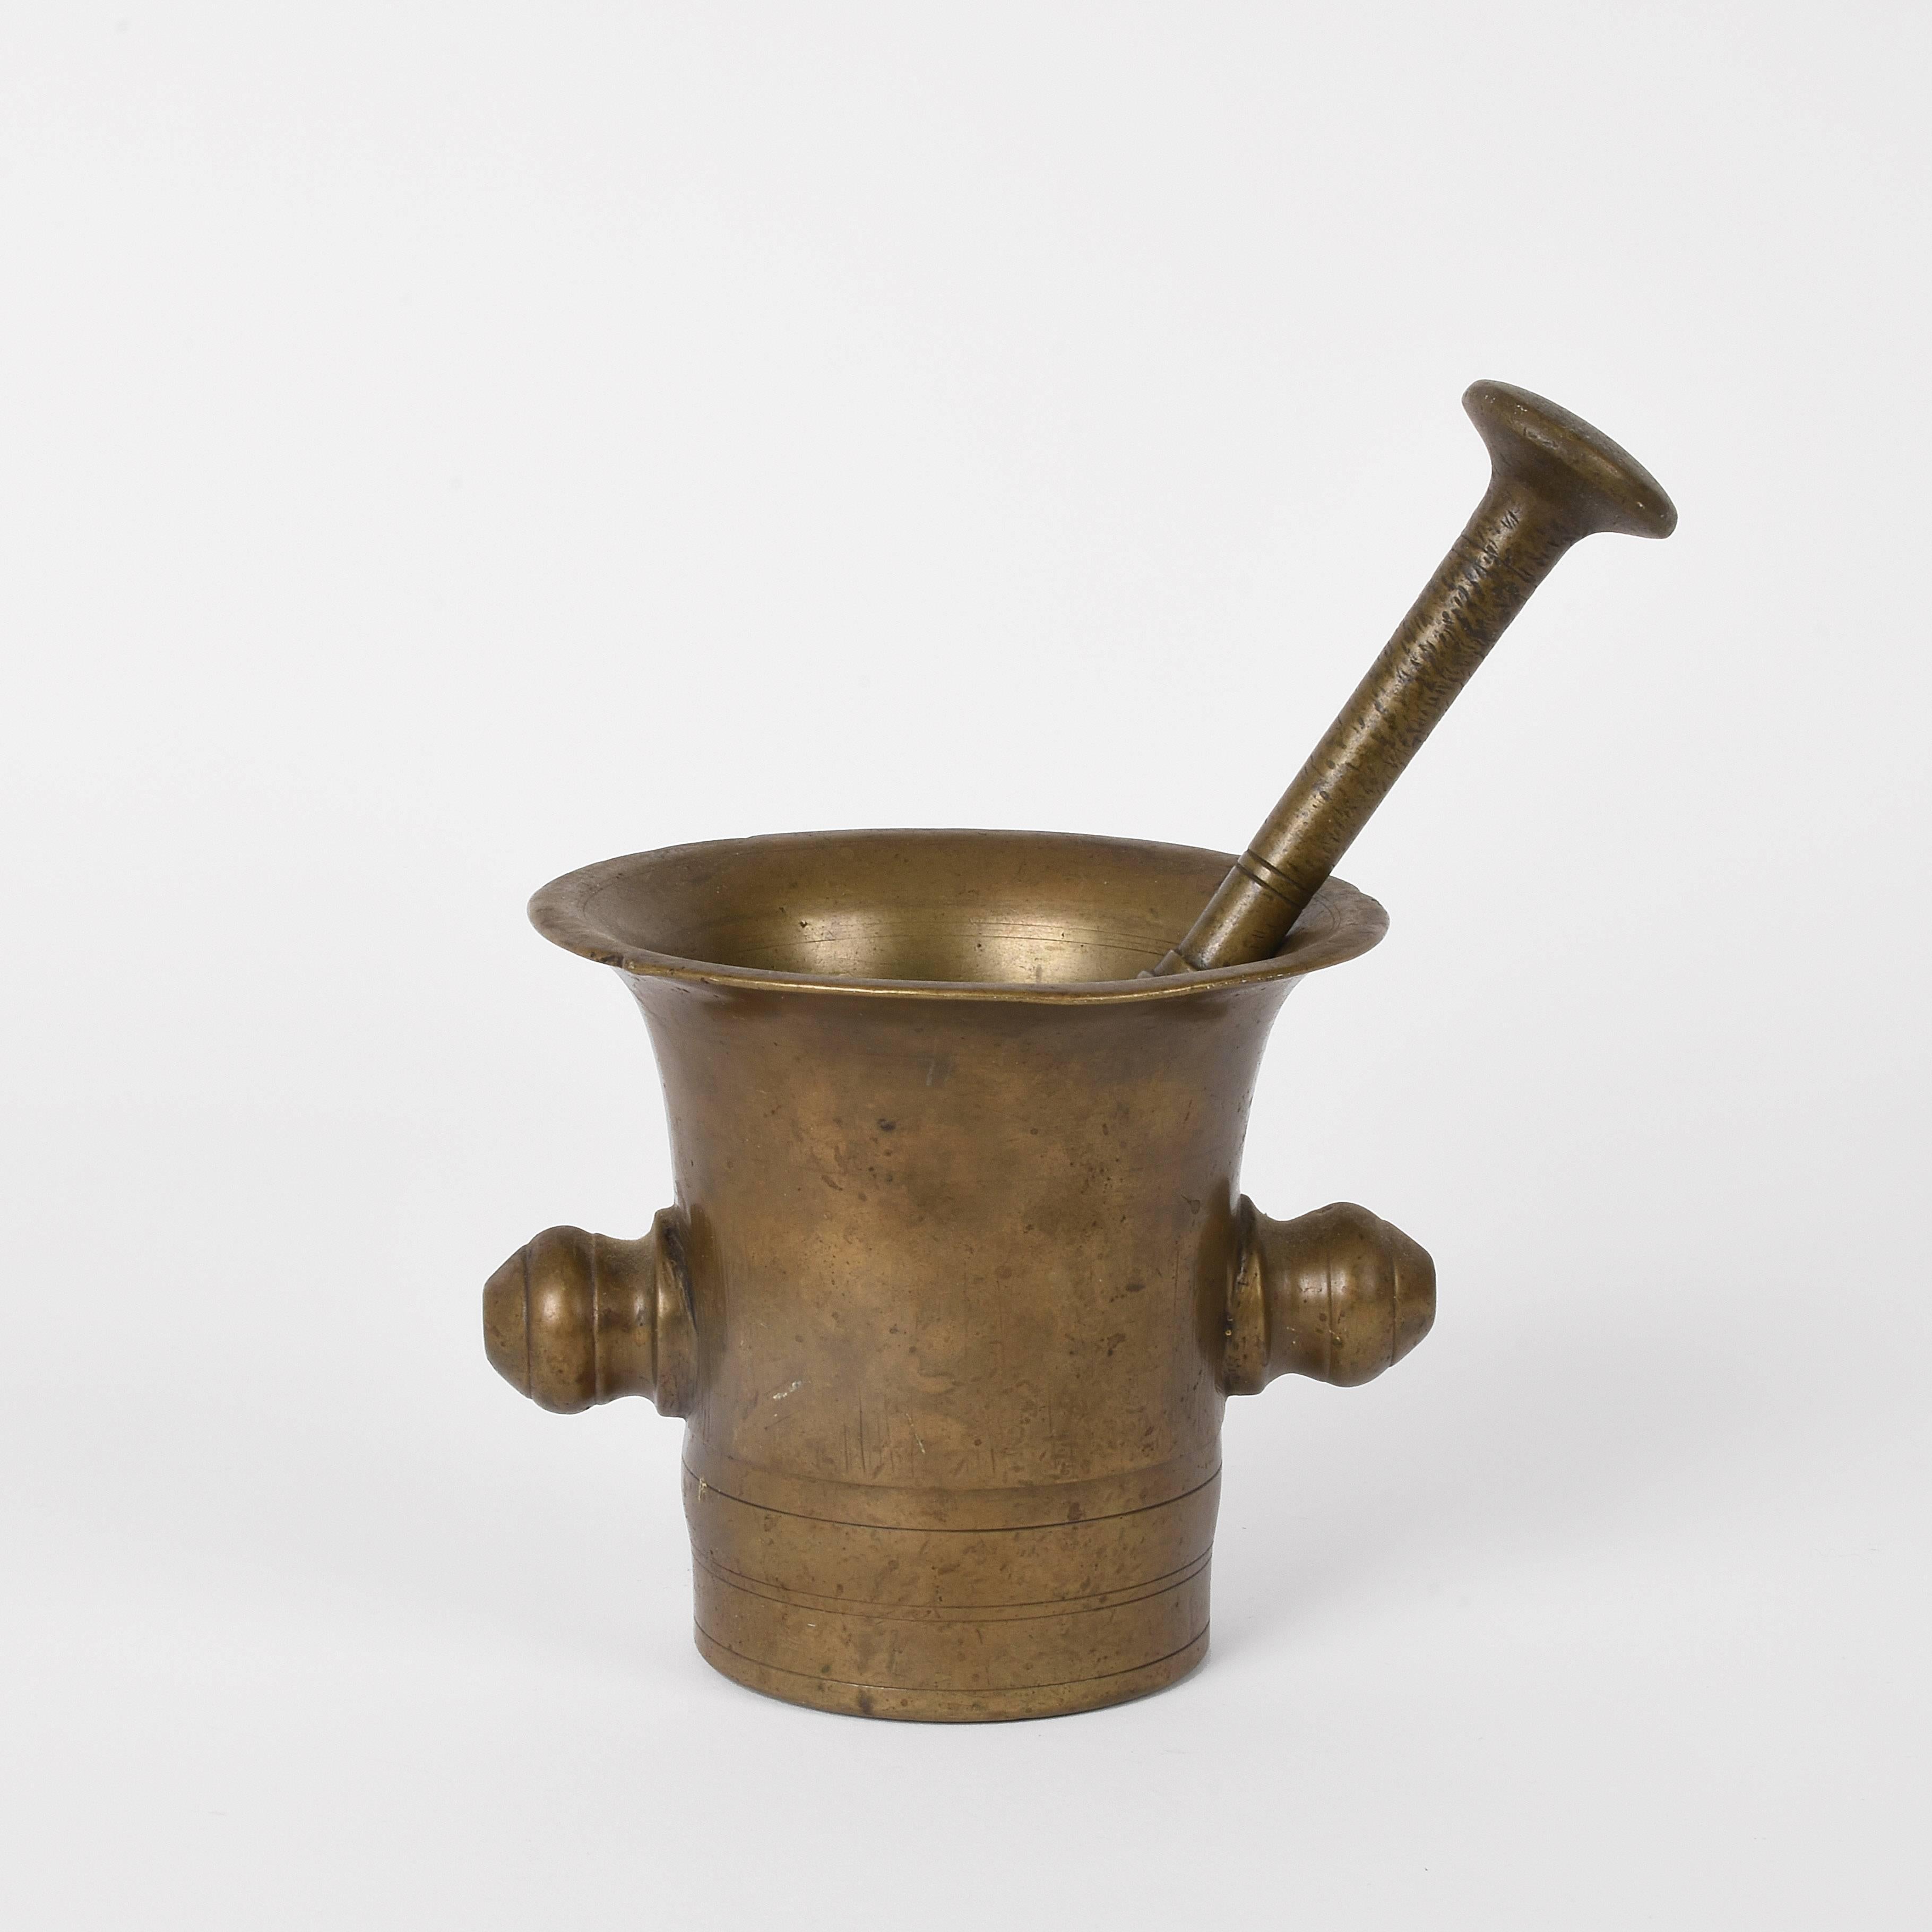 Wonderful and antique handmade bronze mortar with its pestle.

Pharmacists used this scientific instrument to blend herbs and ingredients during the 19th century.

This desk accessory preserves its original patina and would be a perfect gift for